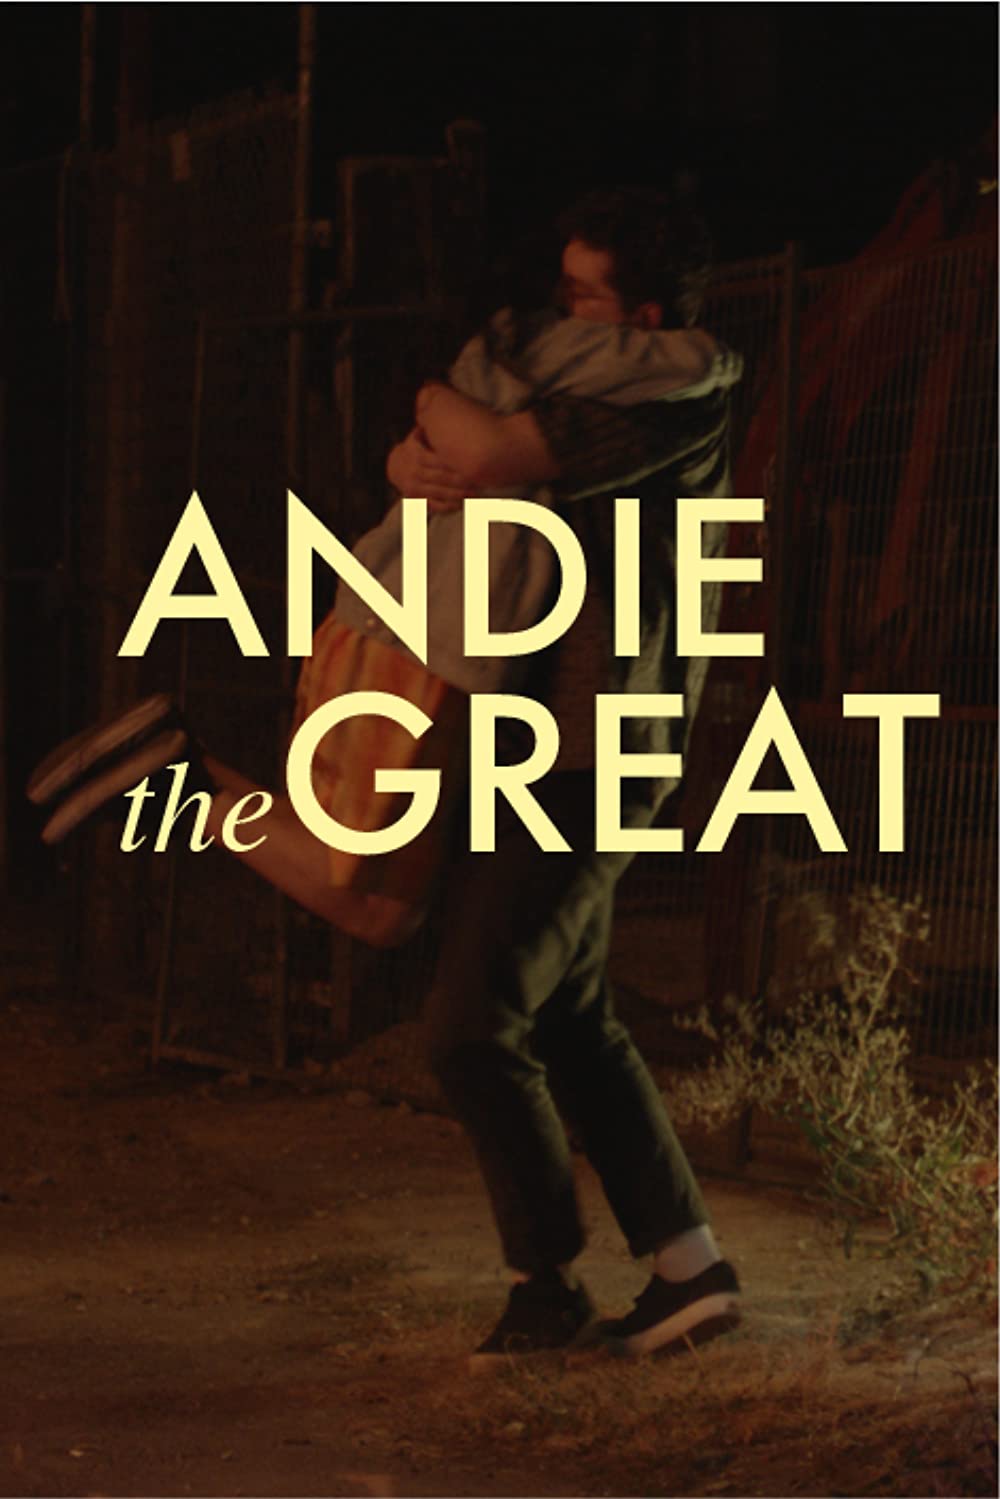 Andie The Great 2021 English 230MB HDRip Download